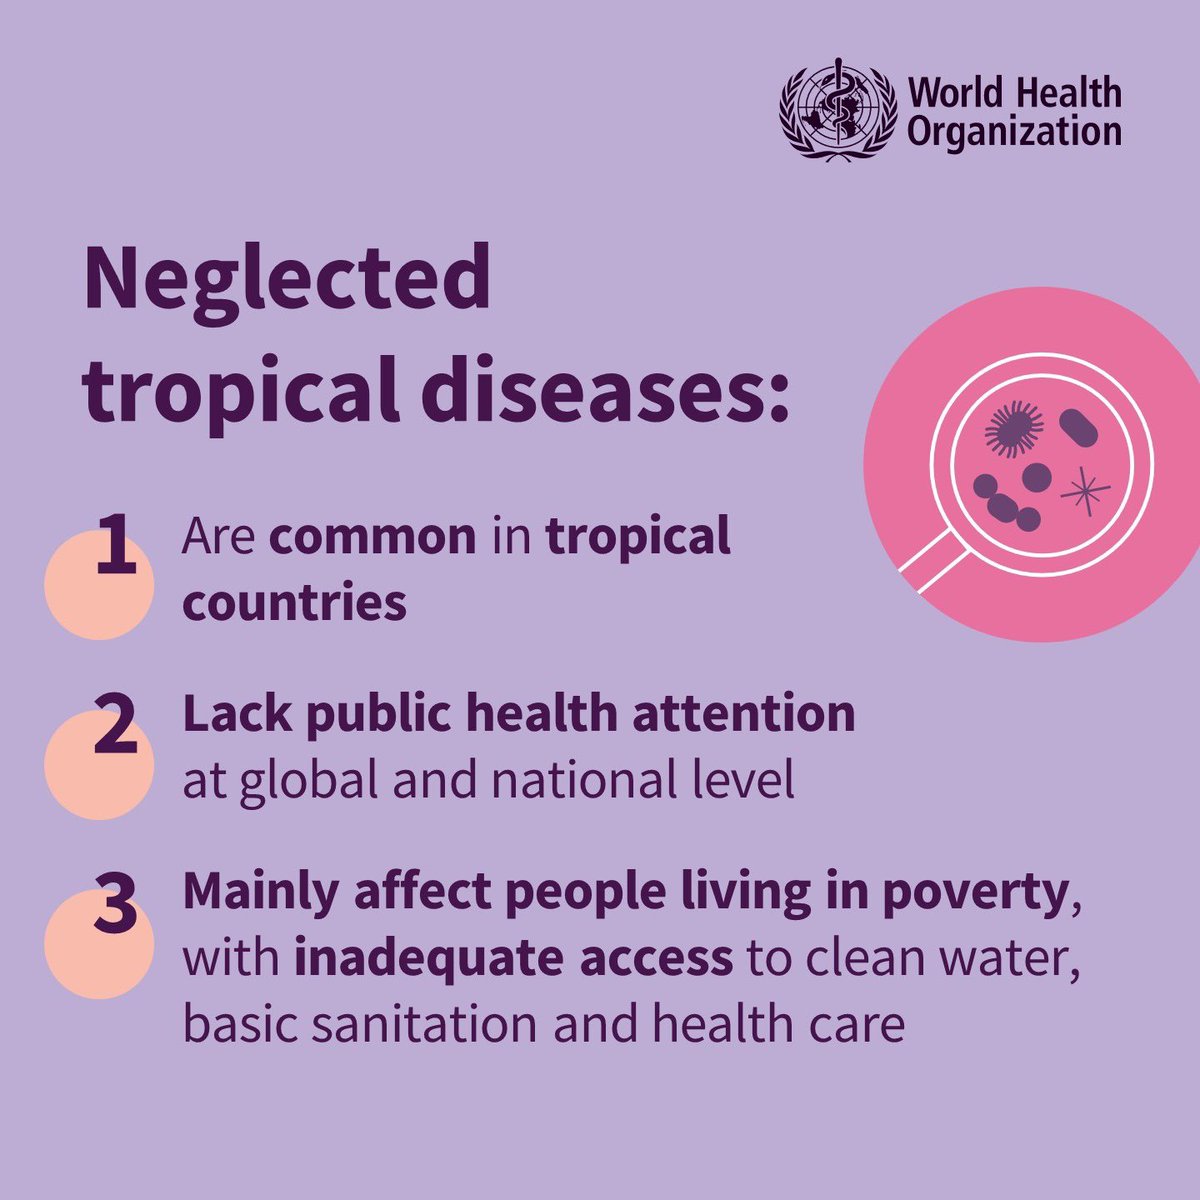 Africa has made significant progress in the fight against Neglected Tropical Diseases #NTDs, with 10 countries eliminating at least one NTD. But the burden remains high.

On this #WorldNTDDay, let us commit to accelerate investment and actions to #BeatNTDs.

#UniteActEliminate